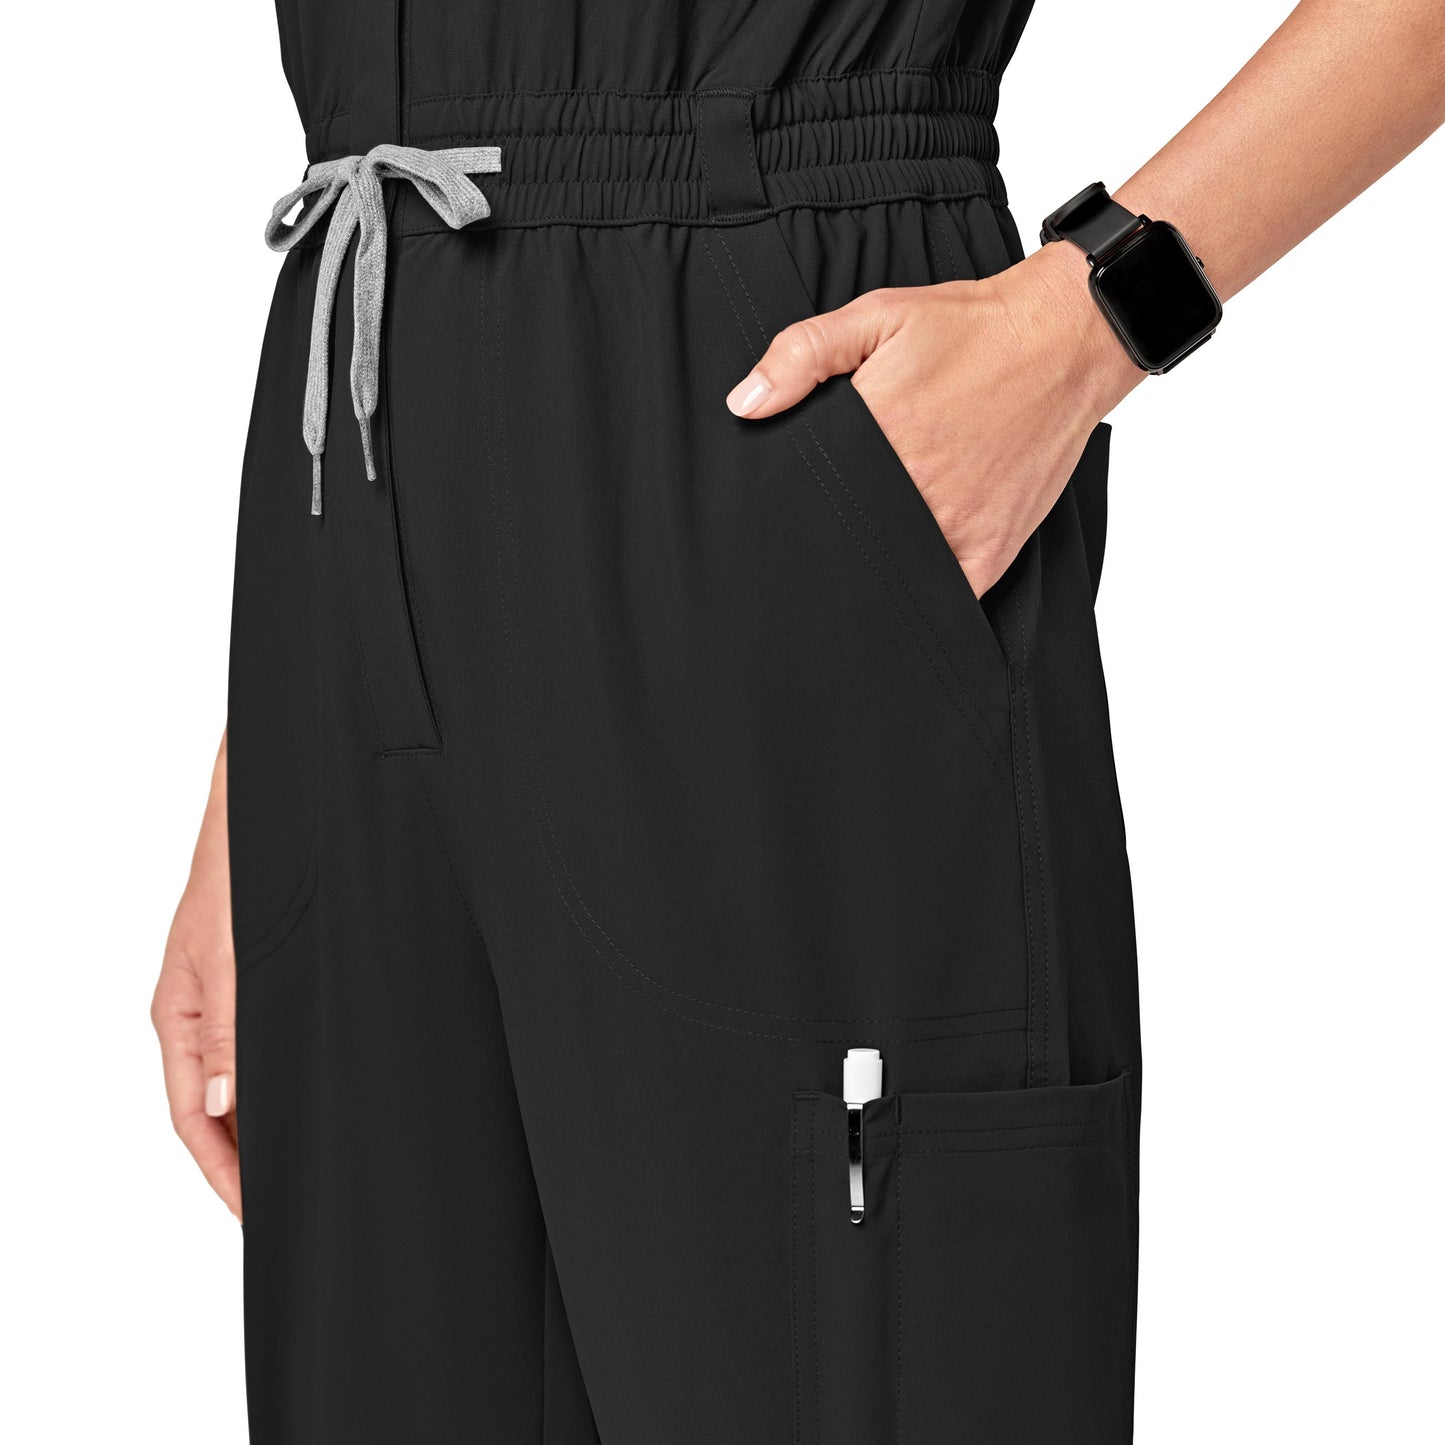 Wonderwink Renew 9-Pocket Zip Front Women's Scrub Jumpsuit, Olive, Jumpsuits  Scrubs Pants From Scrubs And Beyond